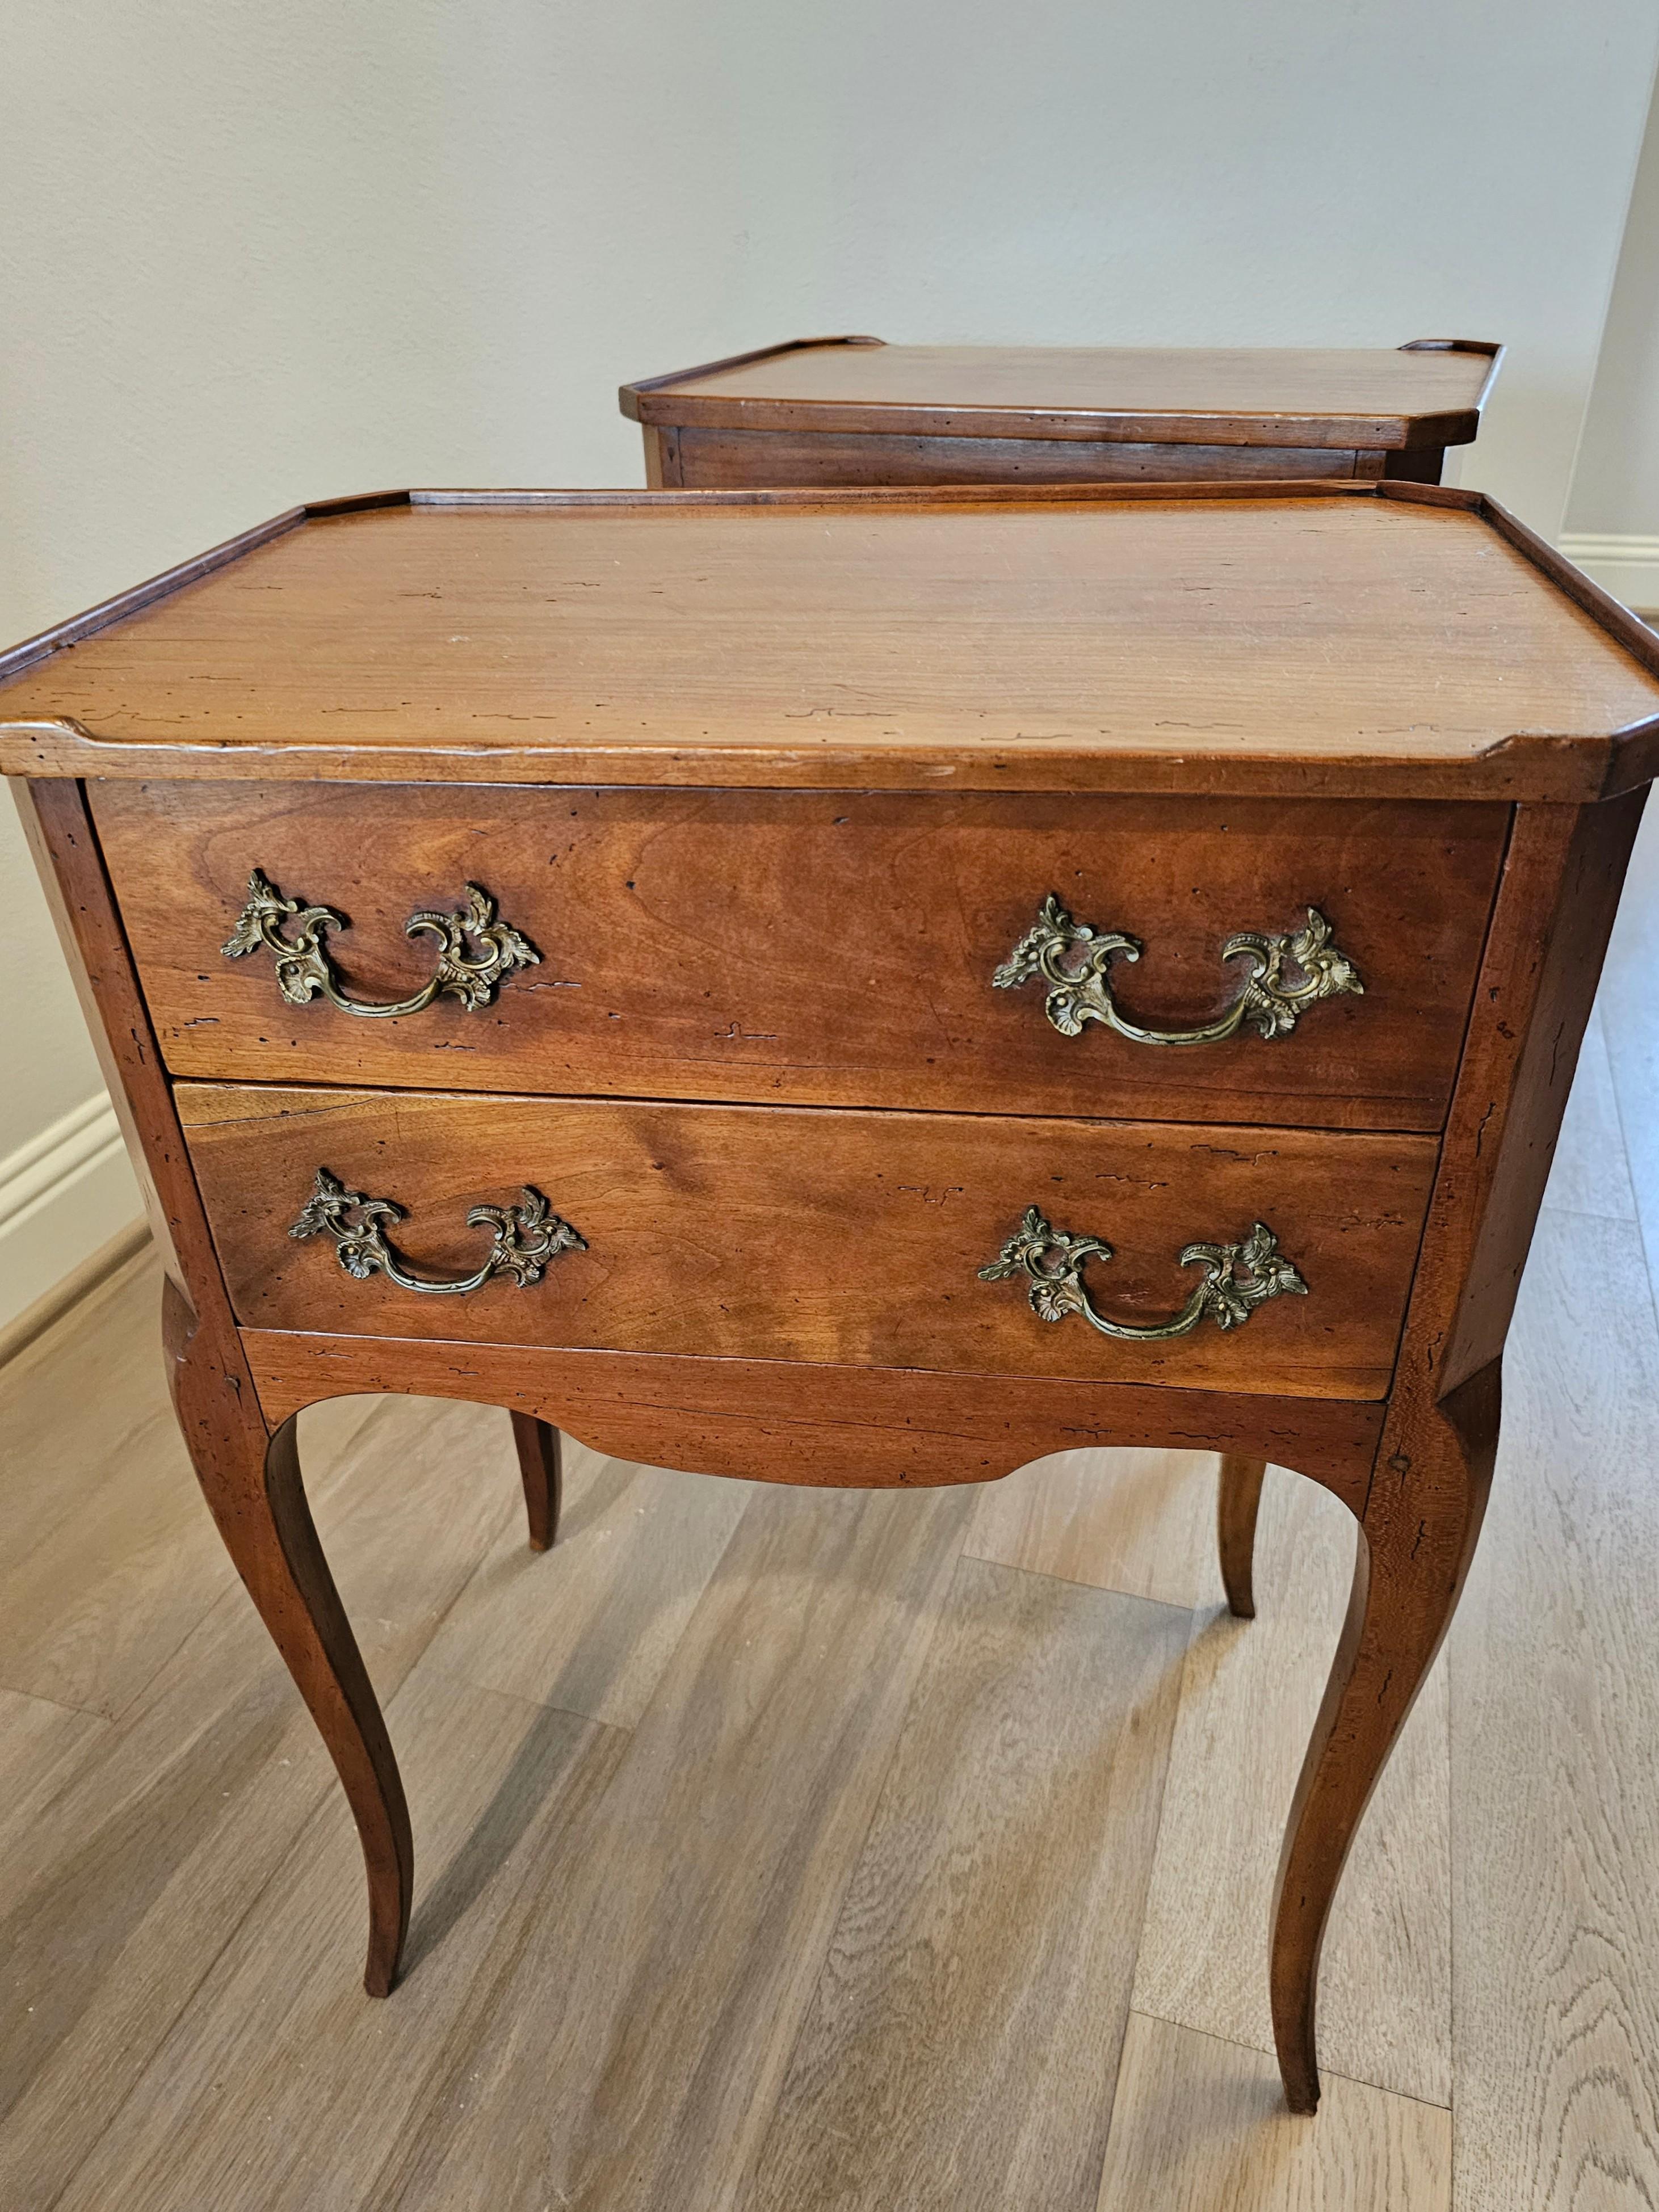 A finely made pair of country French fruitwood nightstands or end tables. circa 1910

Hand-crafted in France in the late 19th / early 20th century, styled in elegant Provincial Louis XV taste, finished on all sides so they can be placed anywhere in